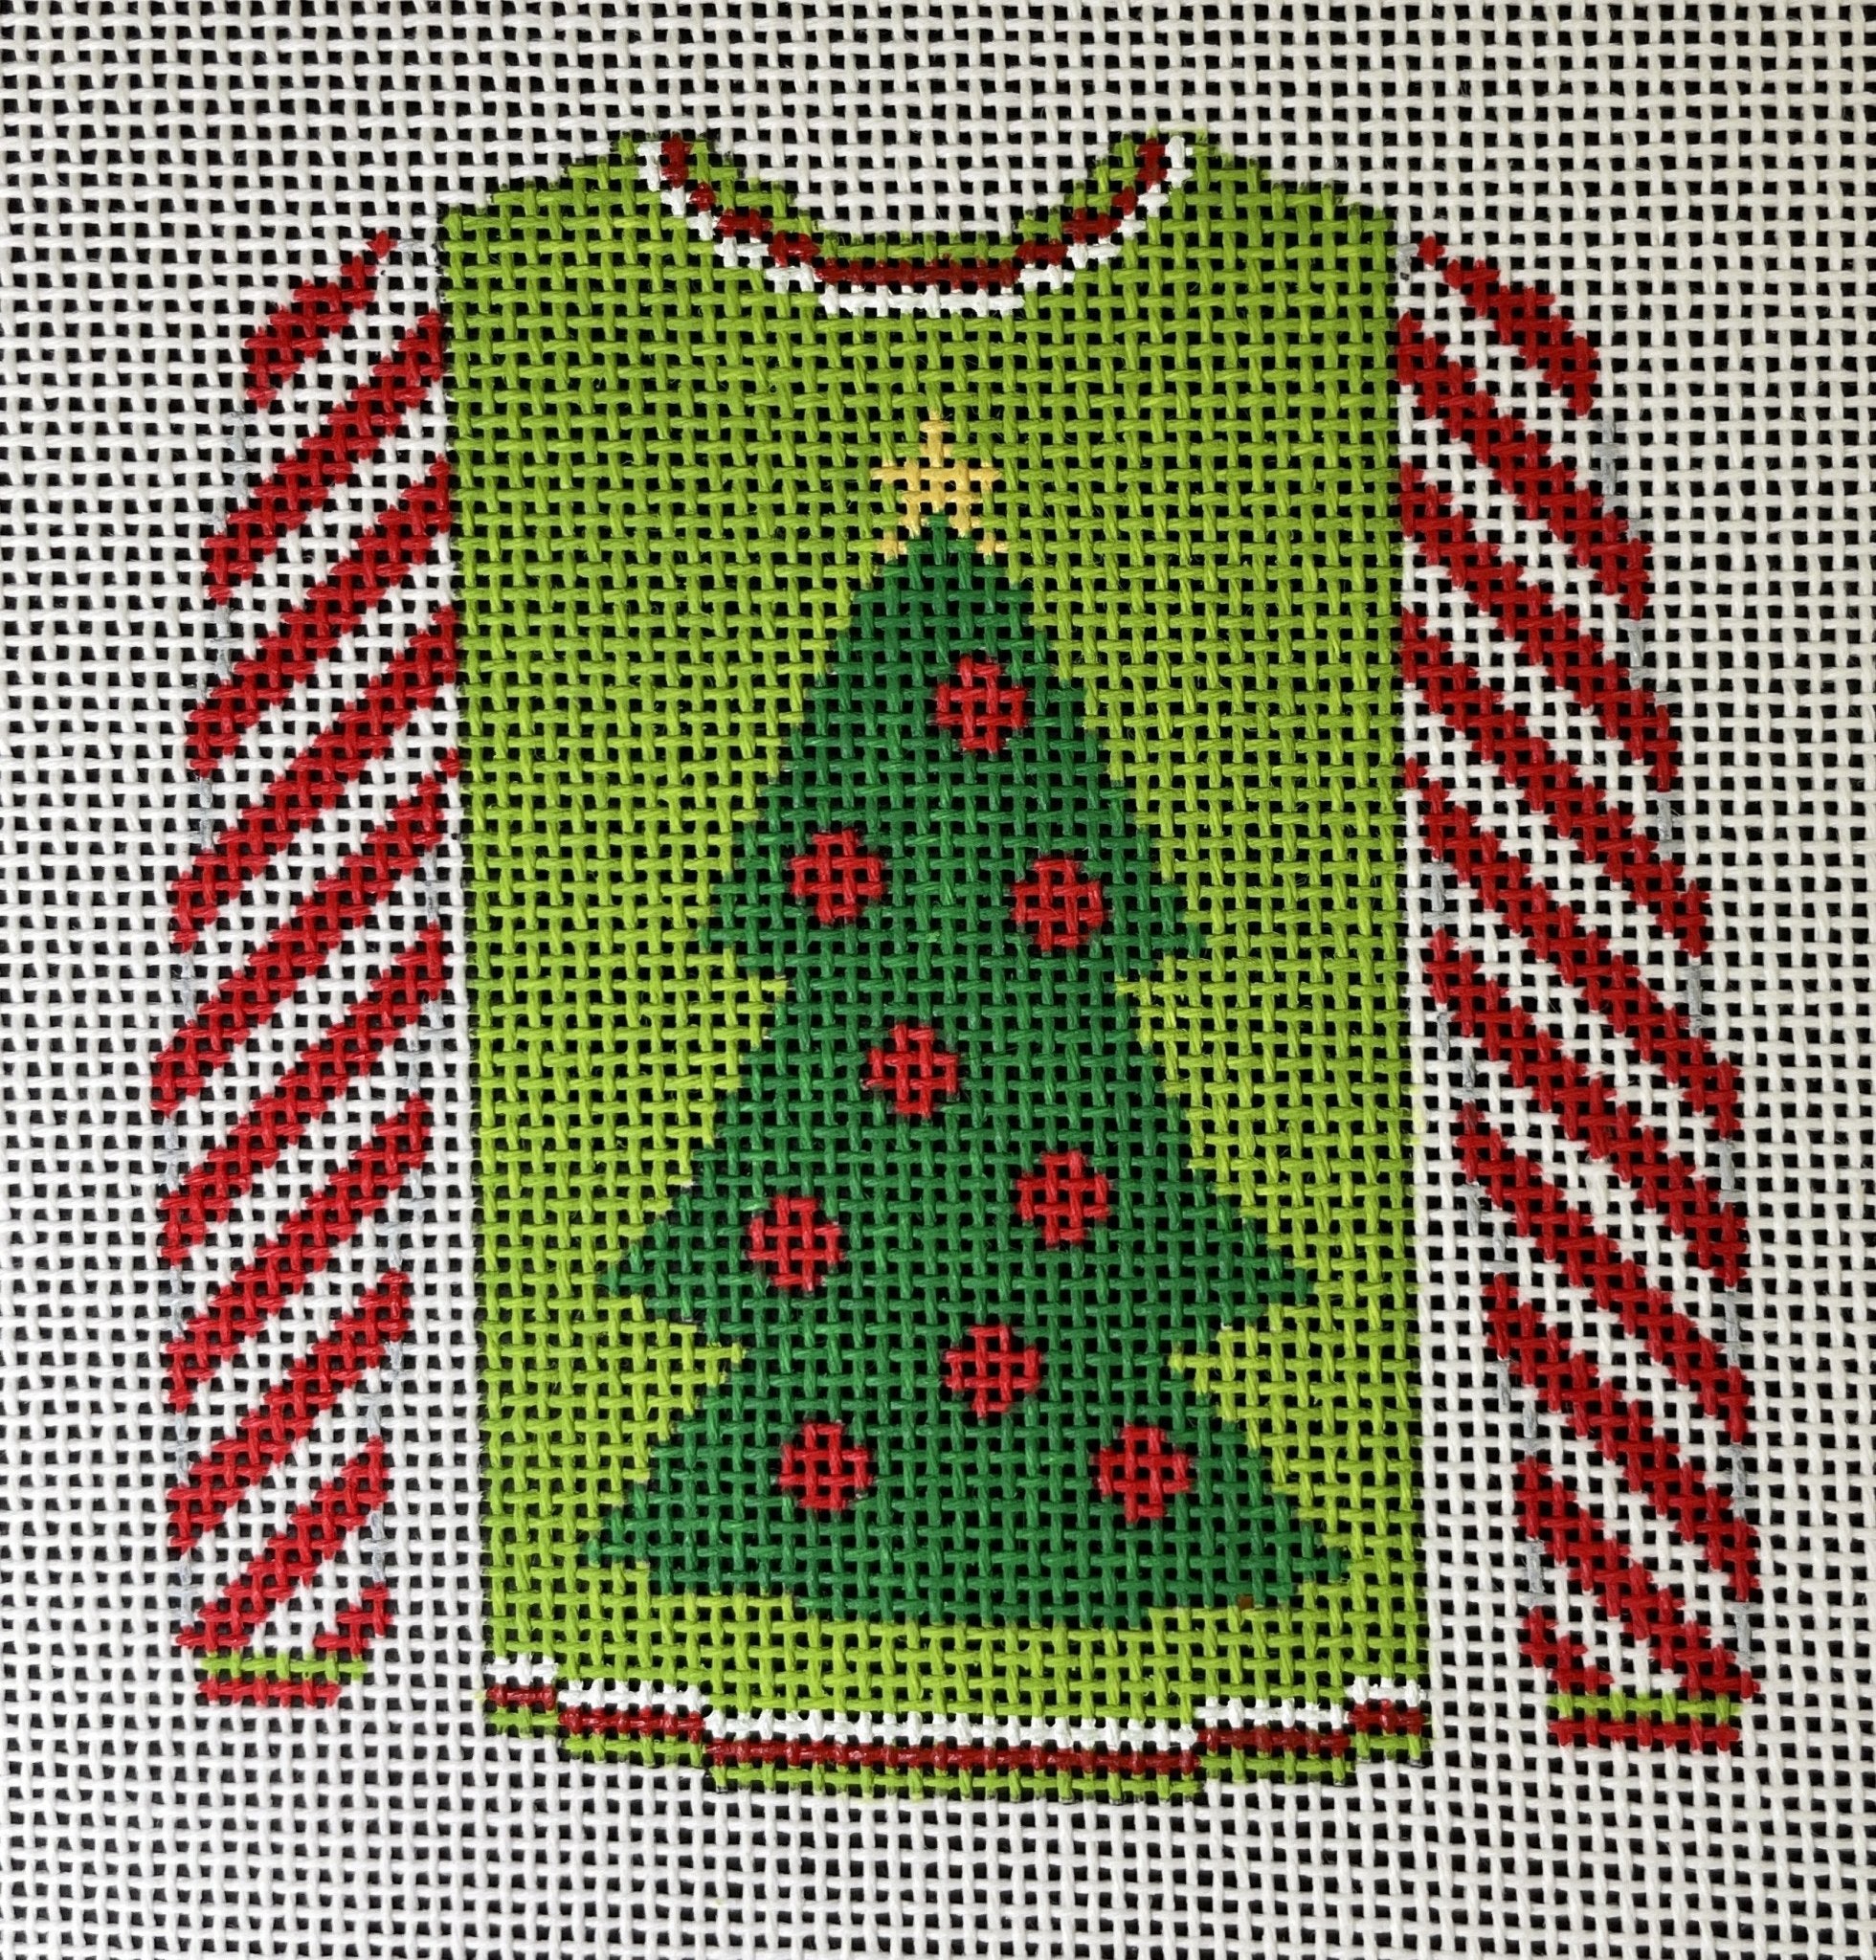 Christmas Tree Sweater - The Flying Needles